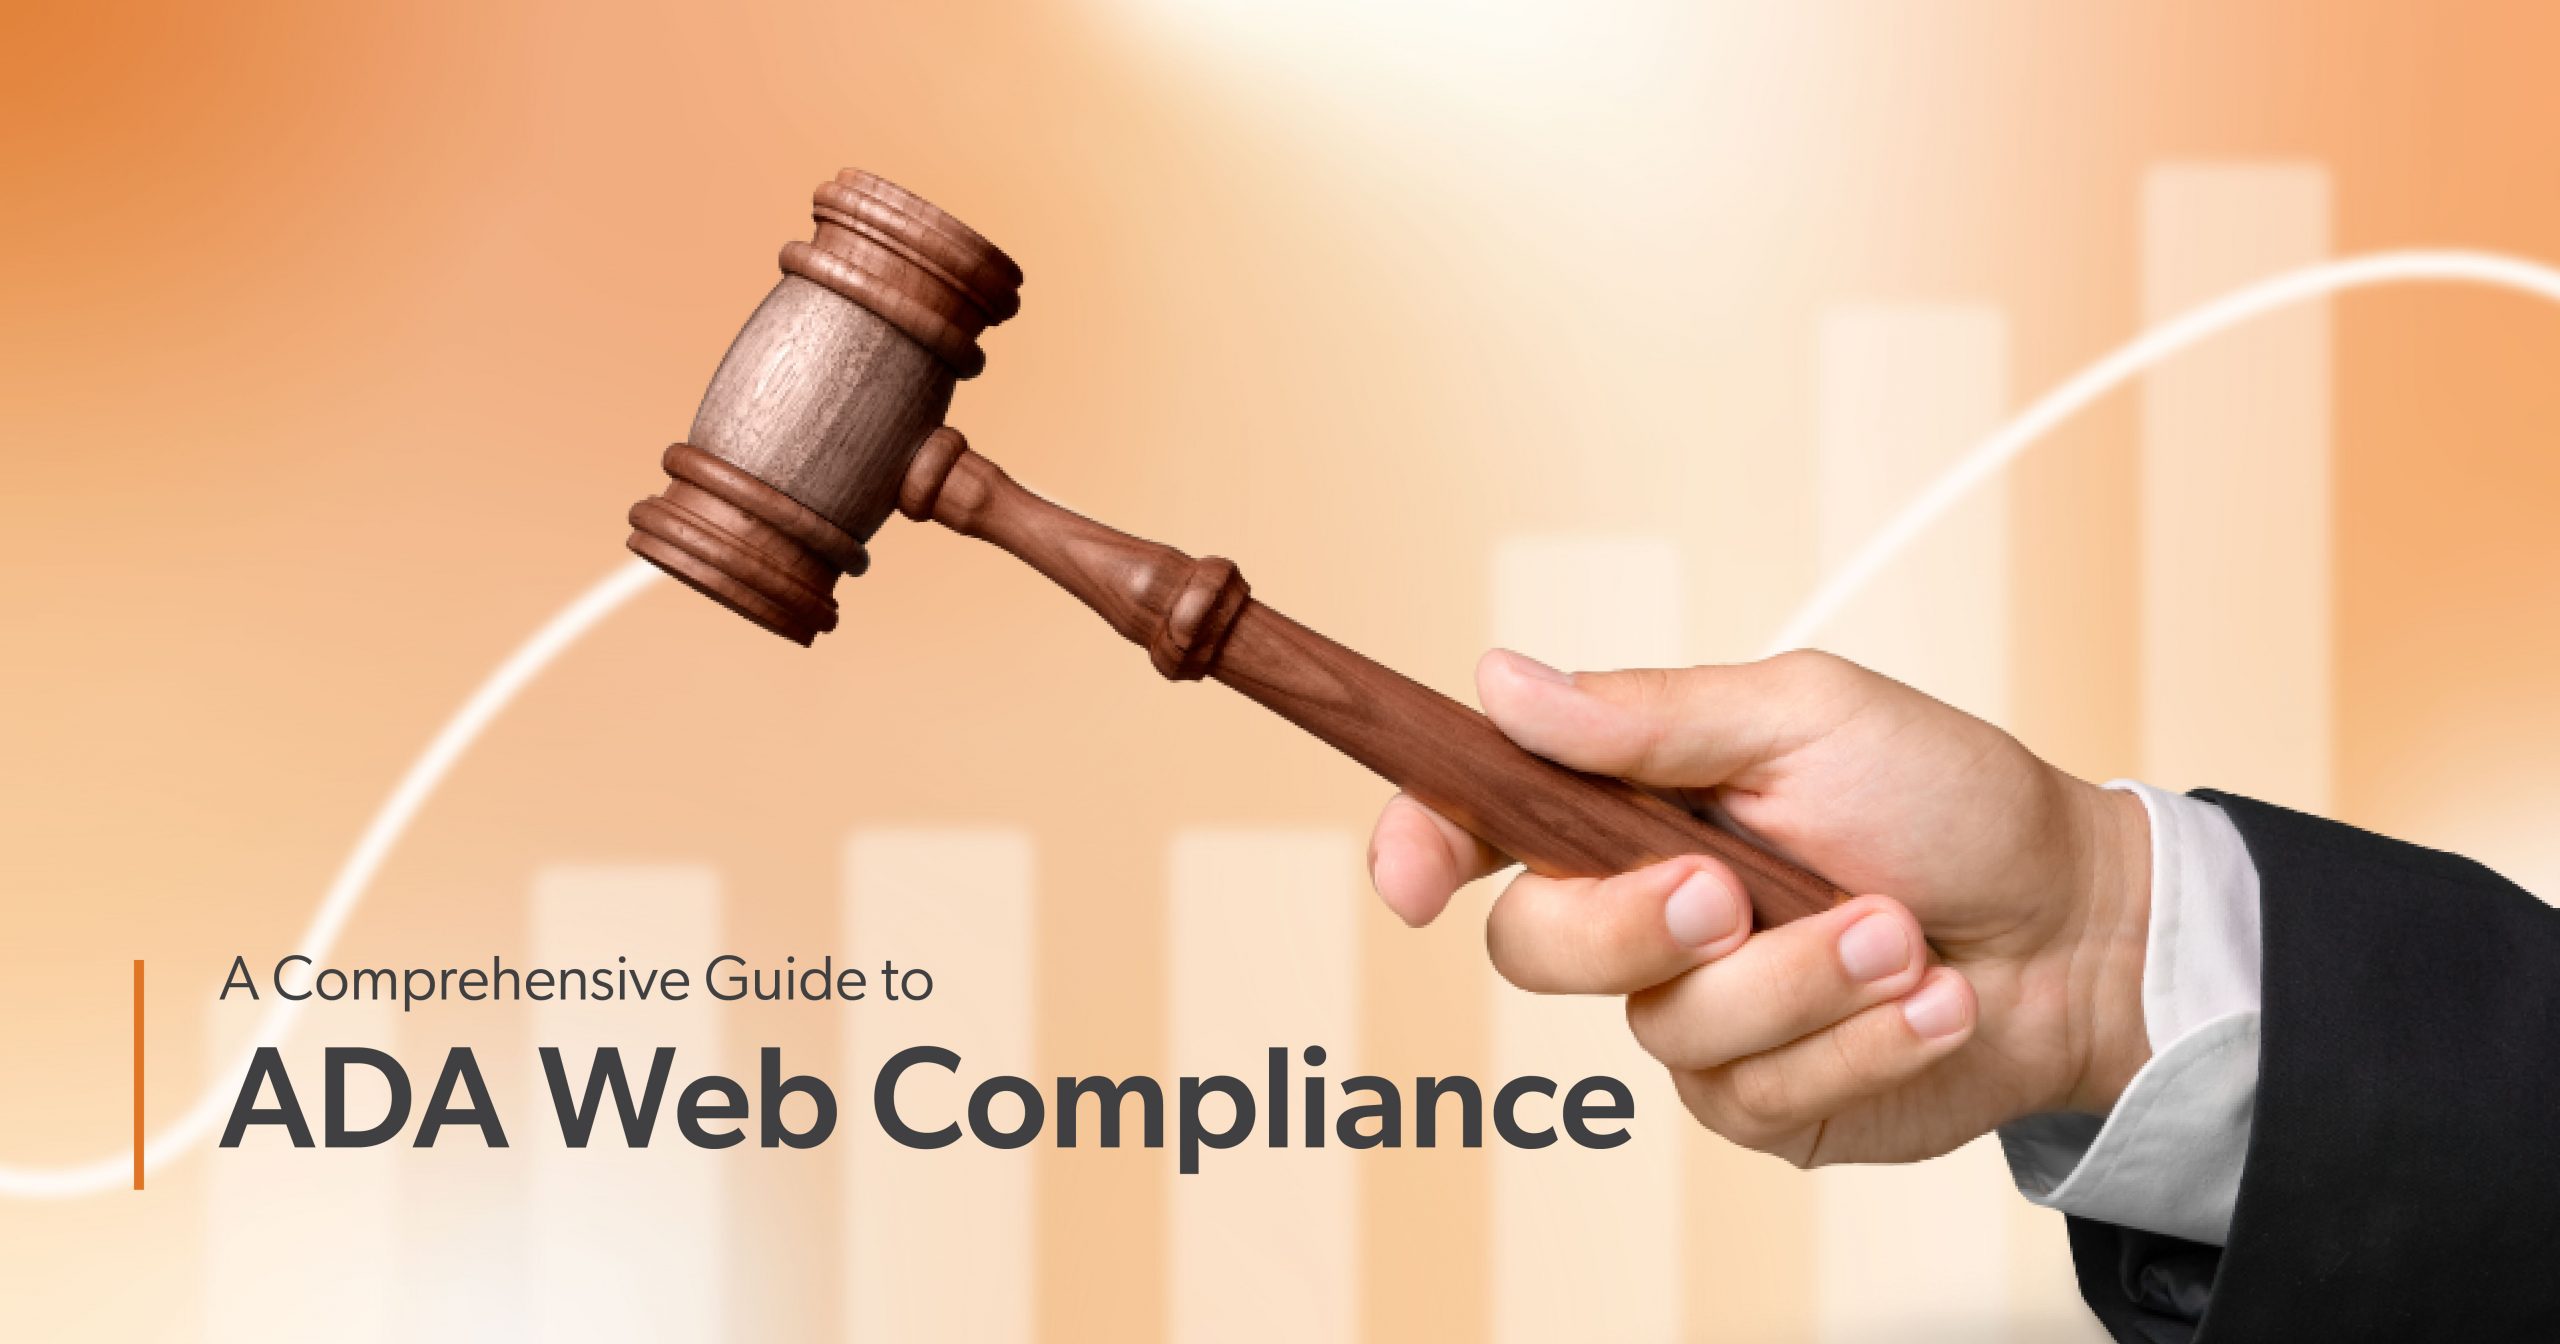 A Comprehensive Guide to ADA Web Compliance